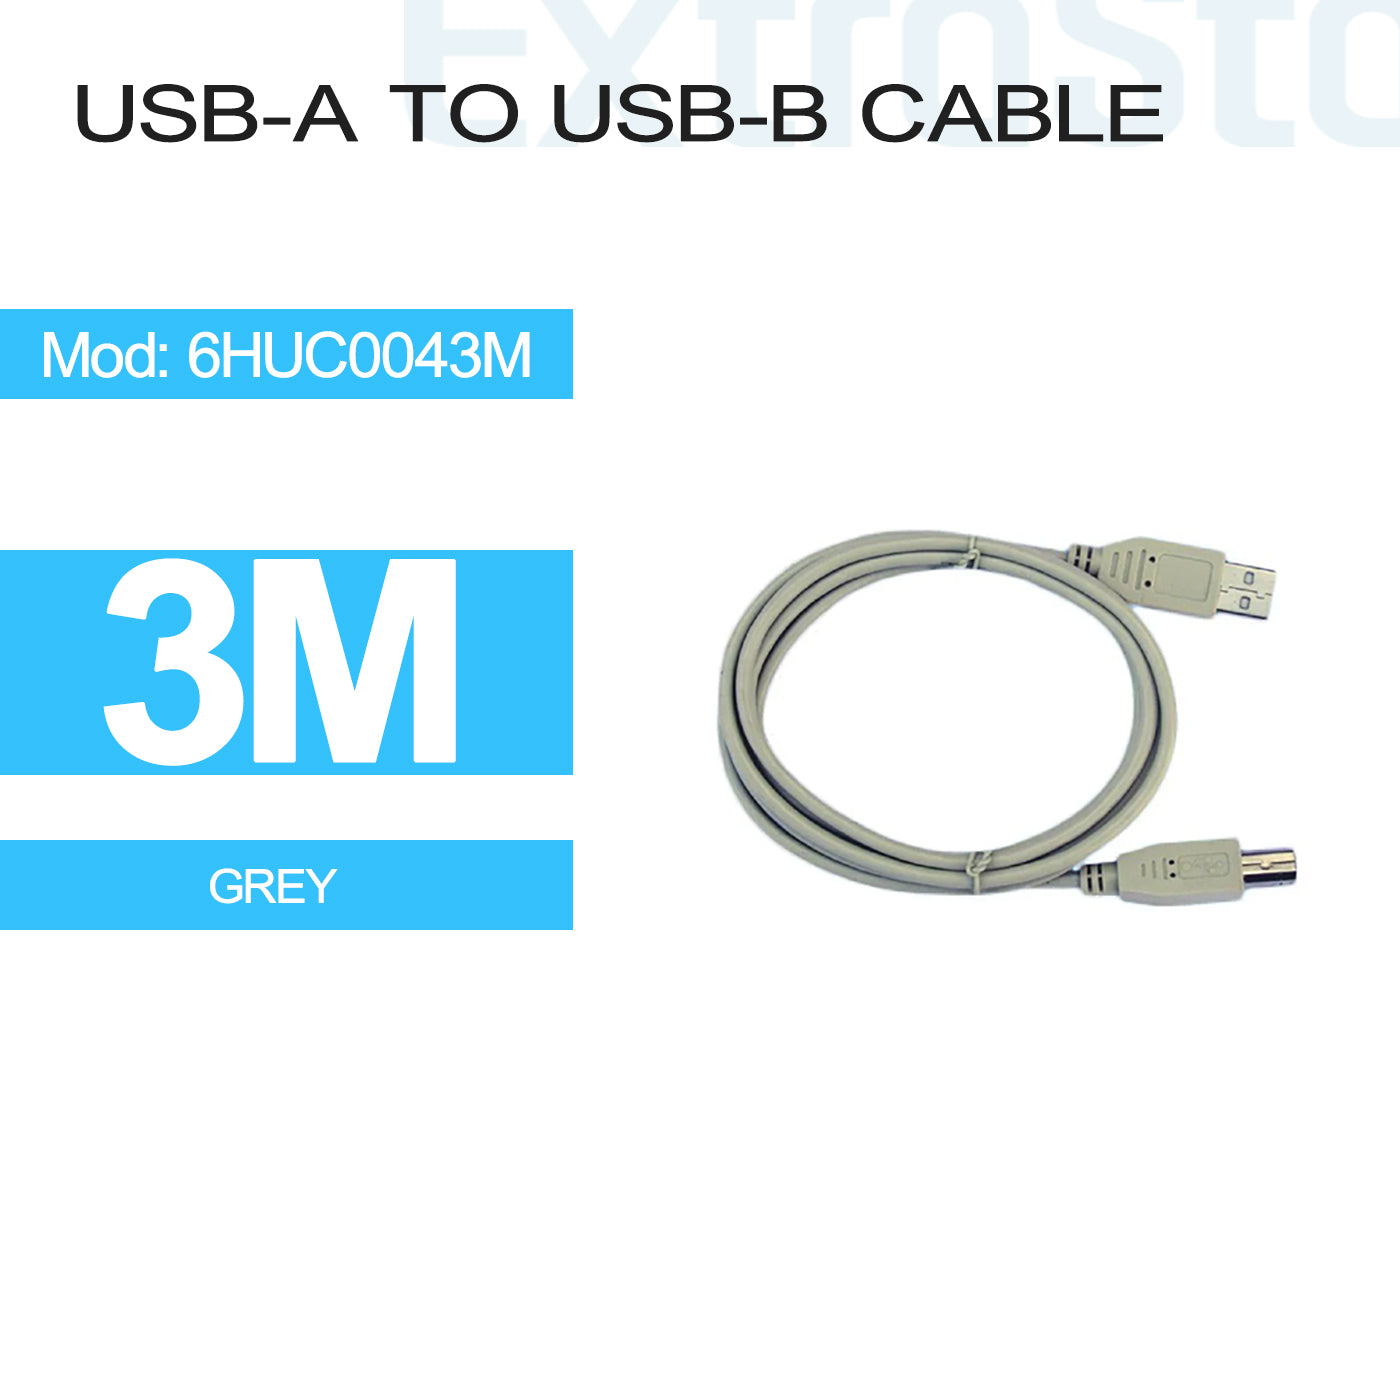 USB-A to USB-B Cable - 3m (6HUC0043M)